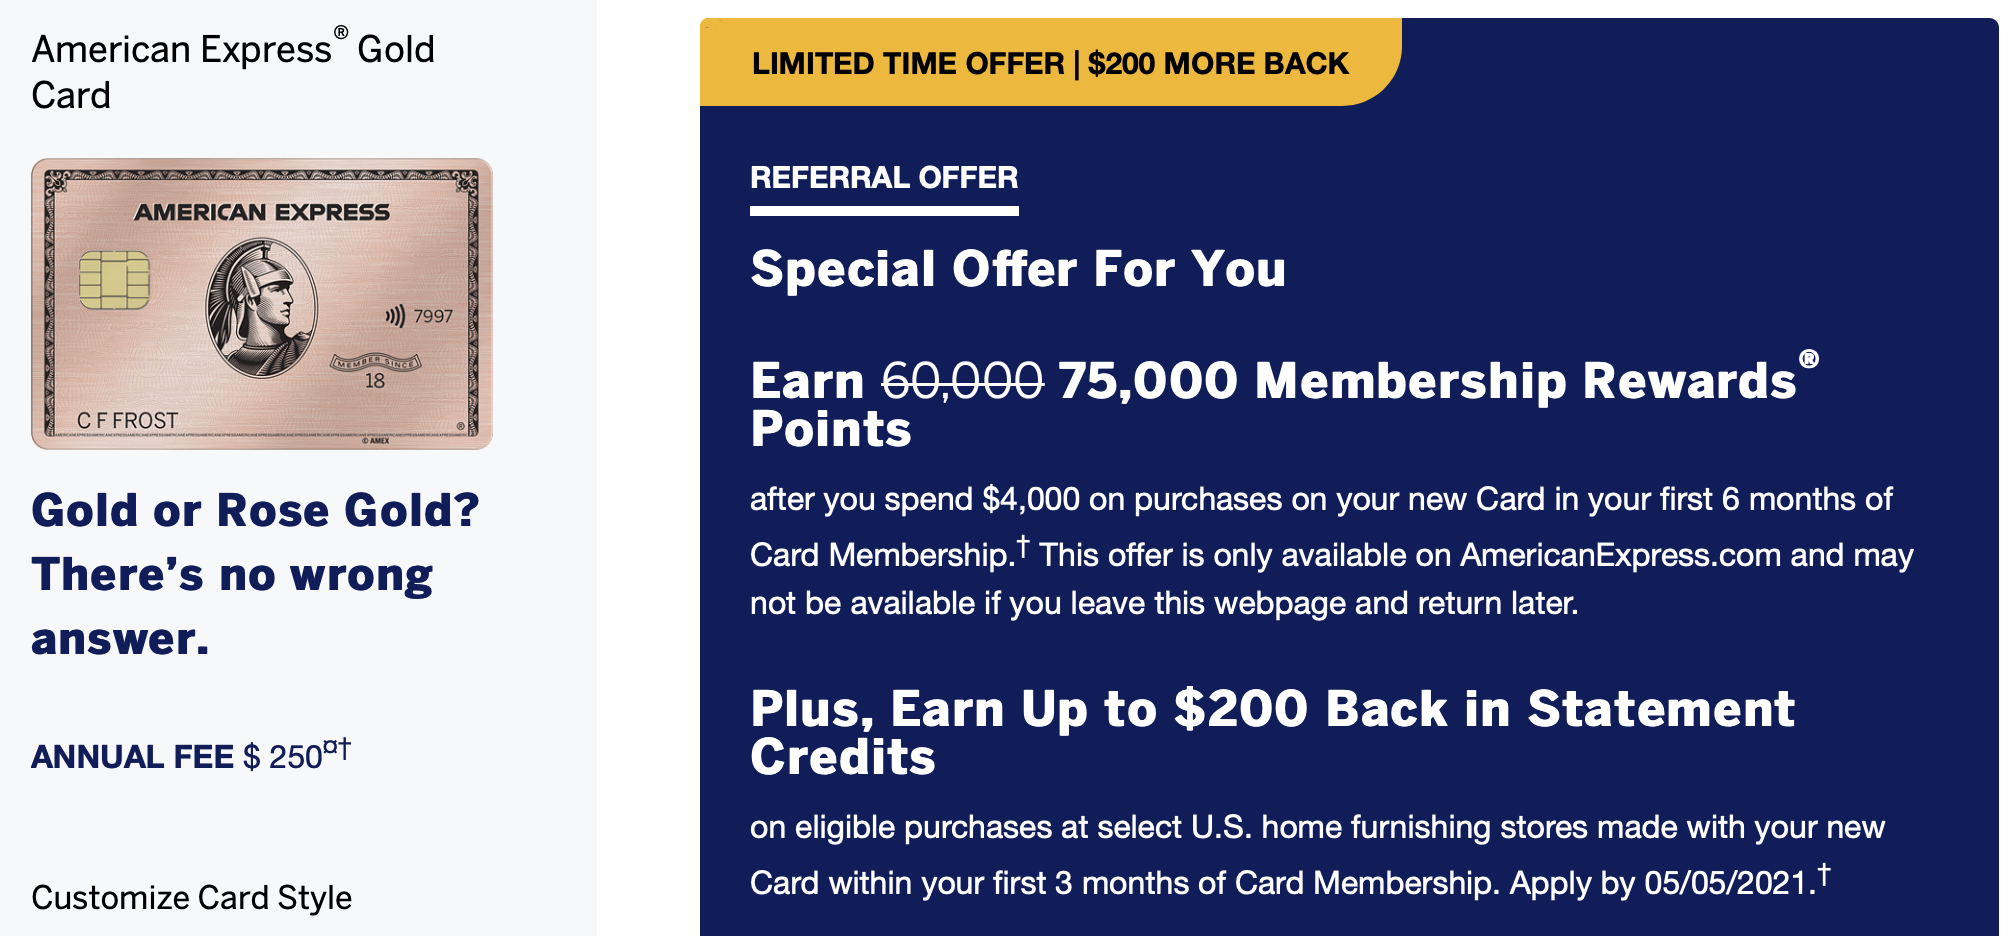 earn-additional-200-statement-credits-at-select-home-furnishing-stores-via-amex-referral-links